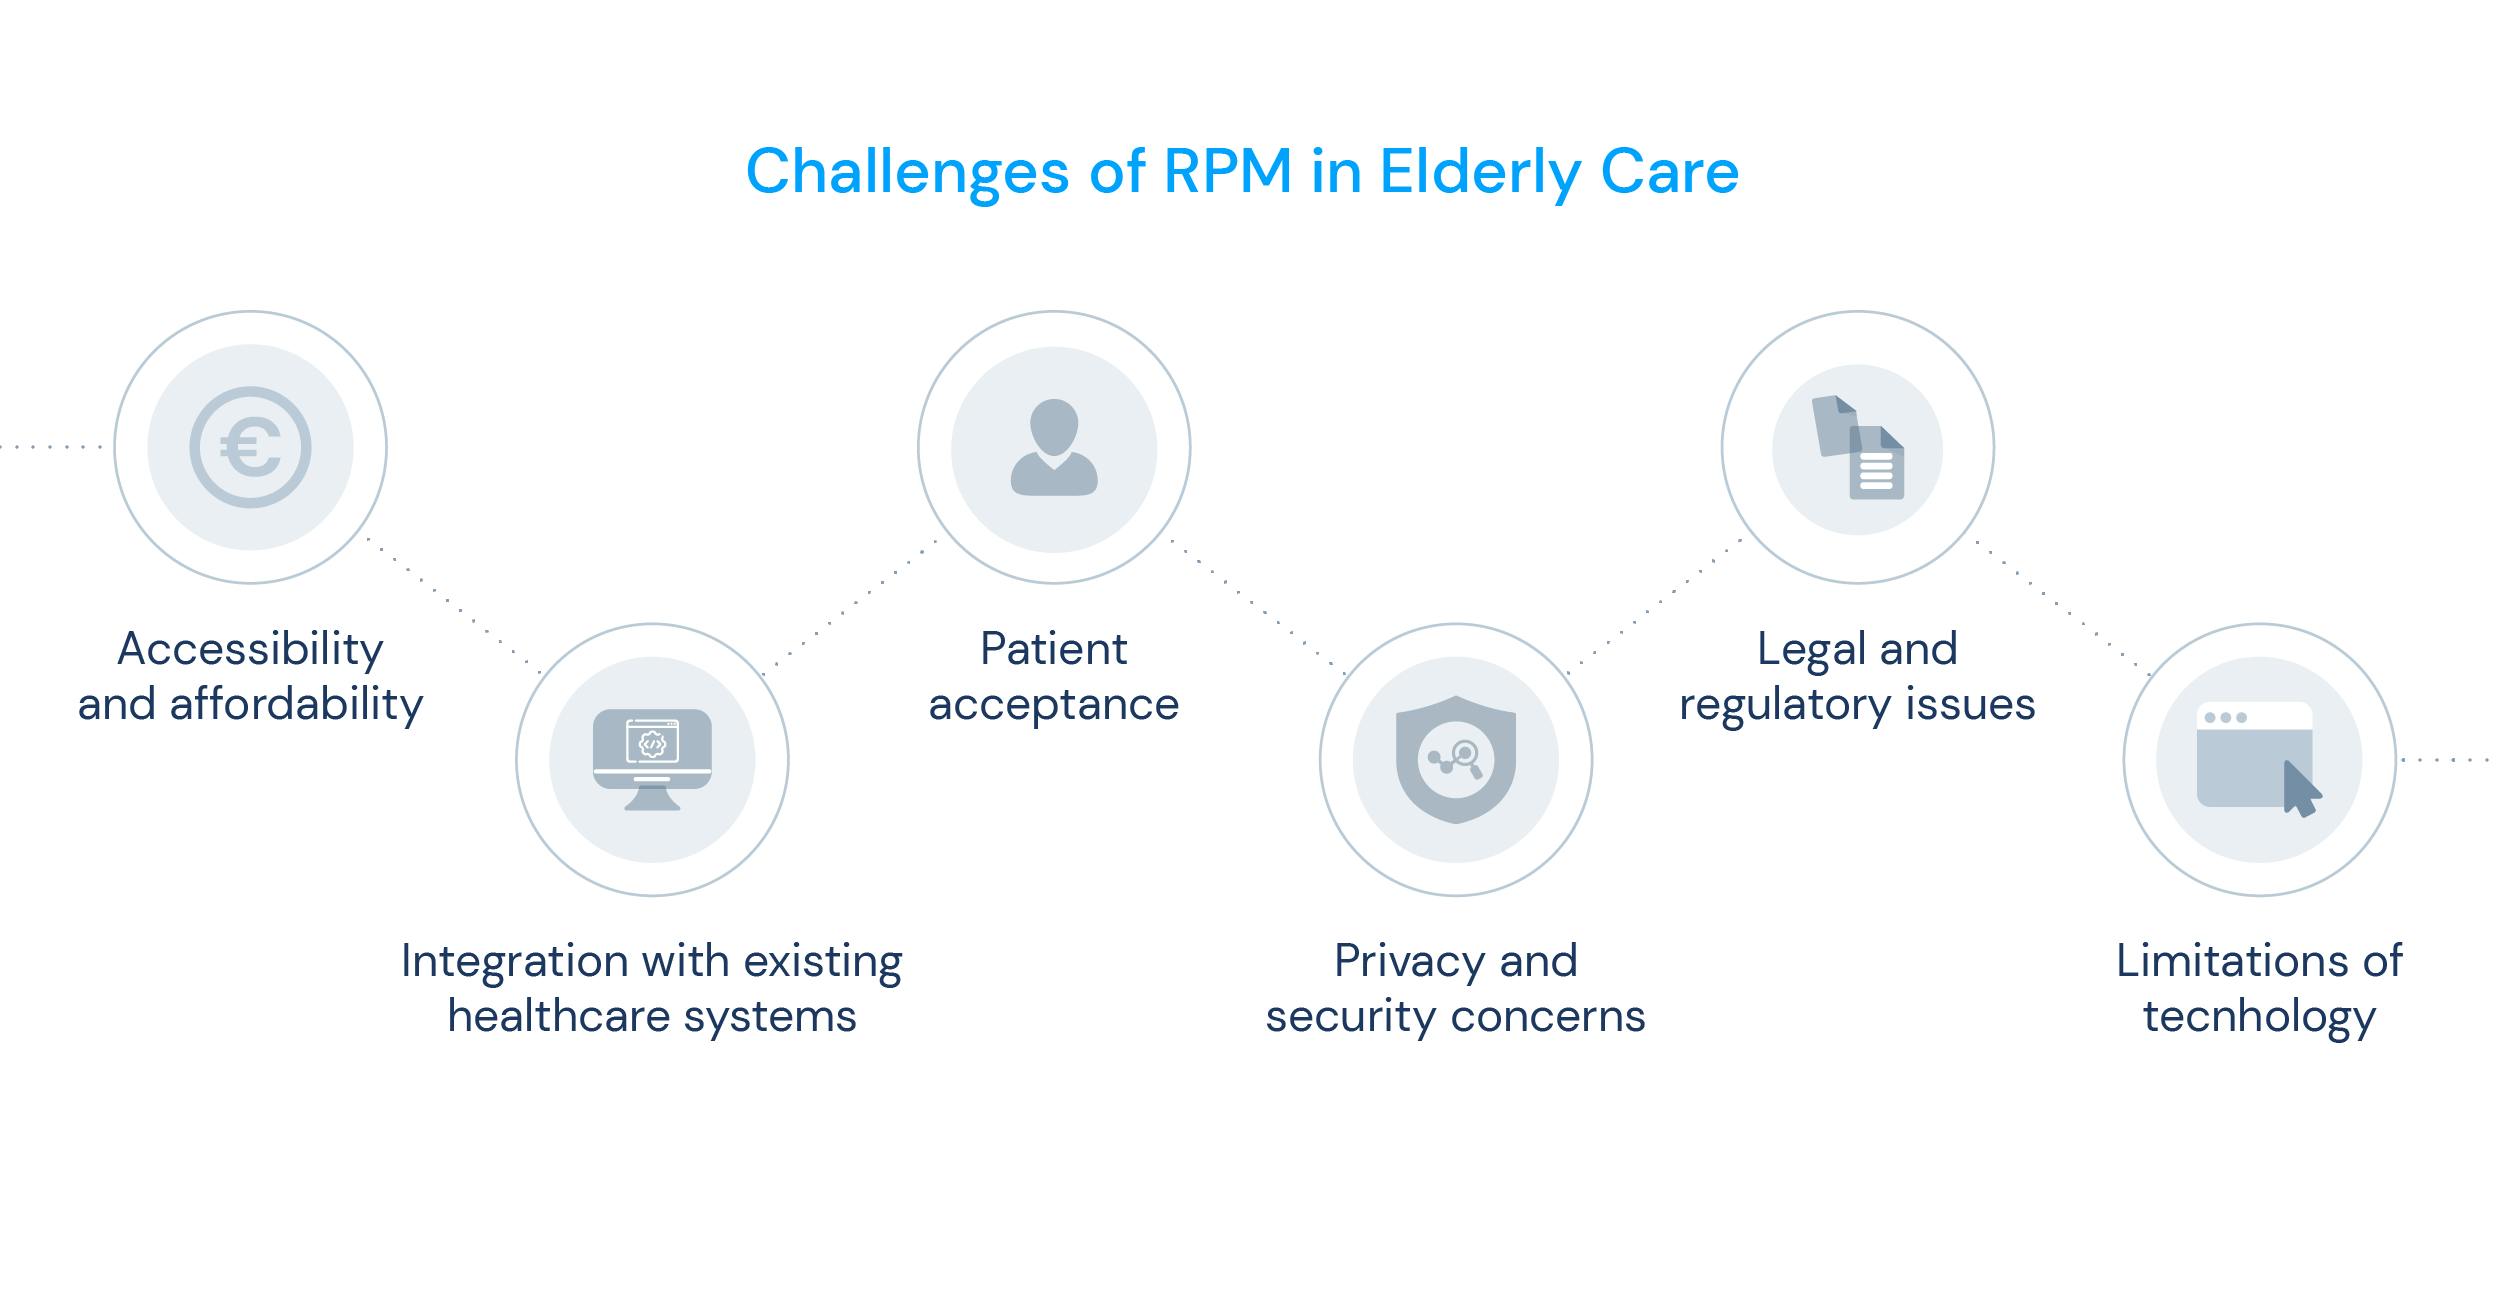 Challenges of RPM in elderly care